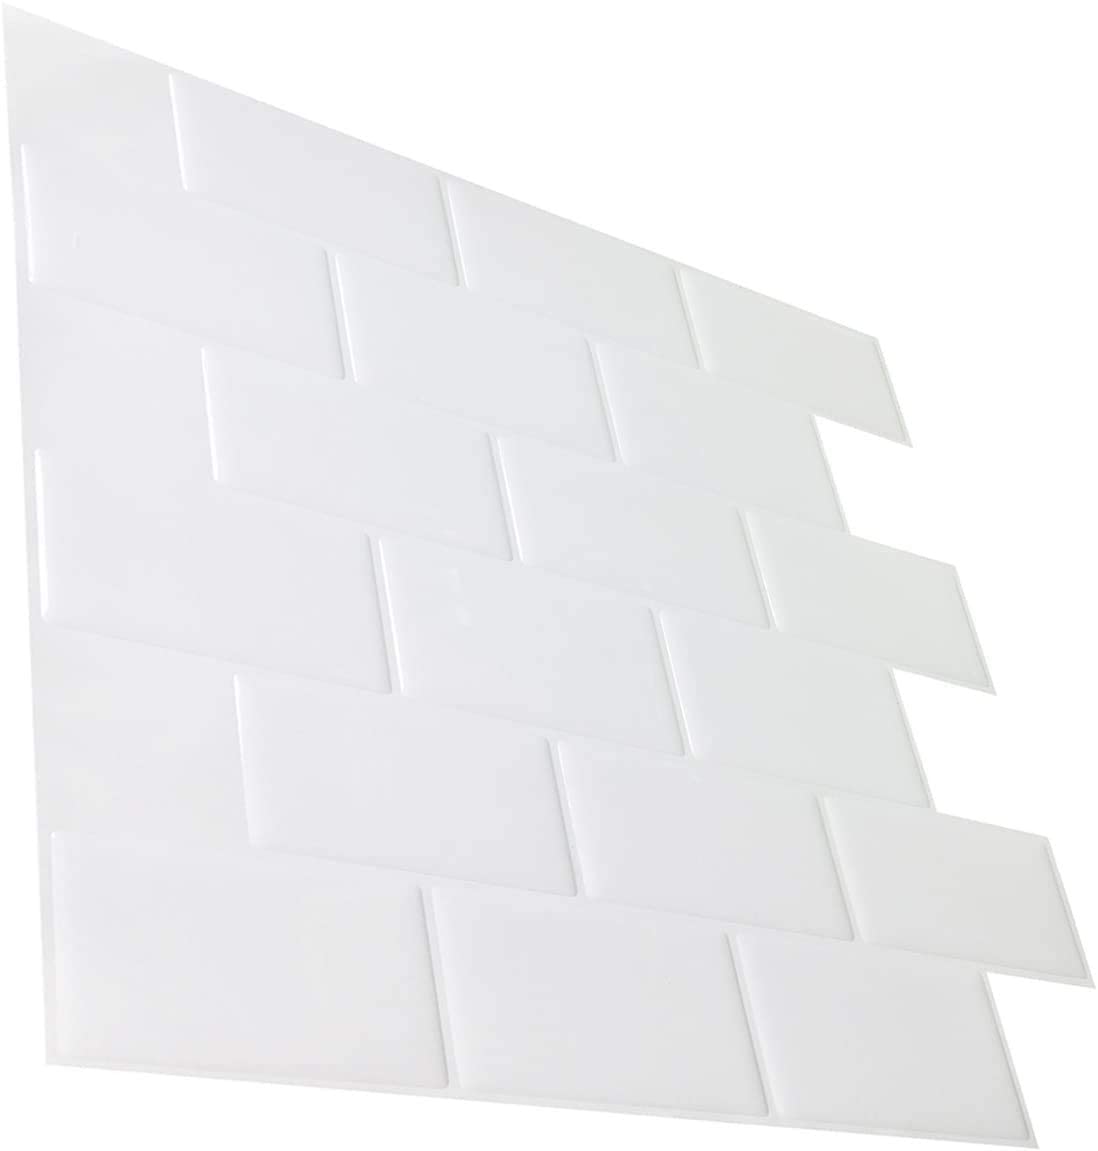 Long King Tile LONGKING White Subway 12 in. x 12 in. Peel and Stick Wall Tile Backsplash (10-Pack), Size: 11.6 inch x 11.6 inch